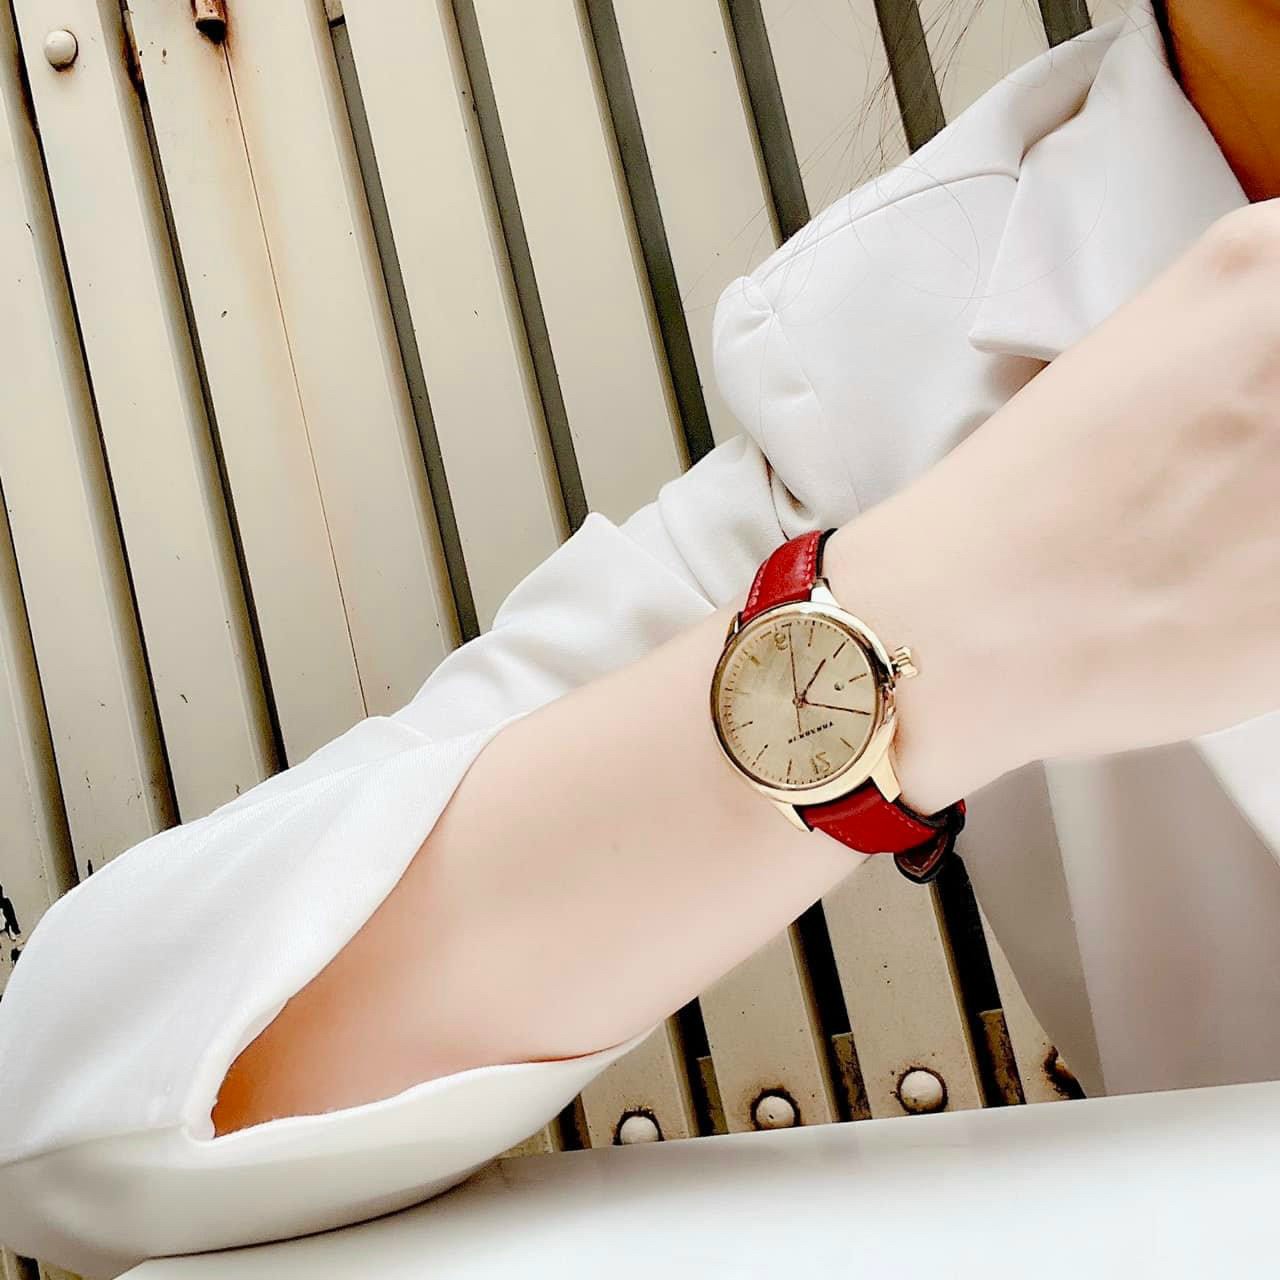 ĐỒNG HỒ NỮ DÂY DA BURBERRY THE CLASSIC ROUND RED LEATHER STRAP LADIES WATCH BU10102 2